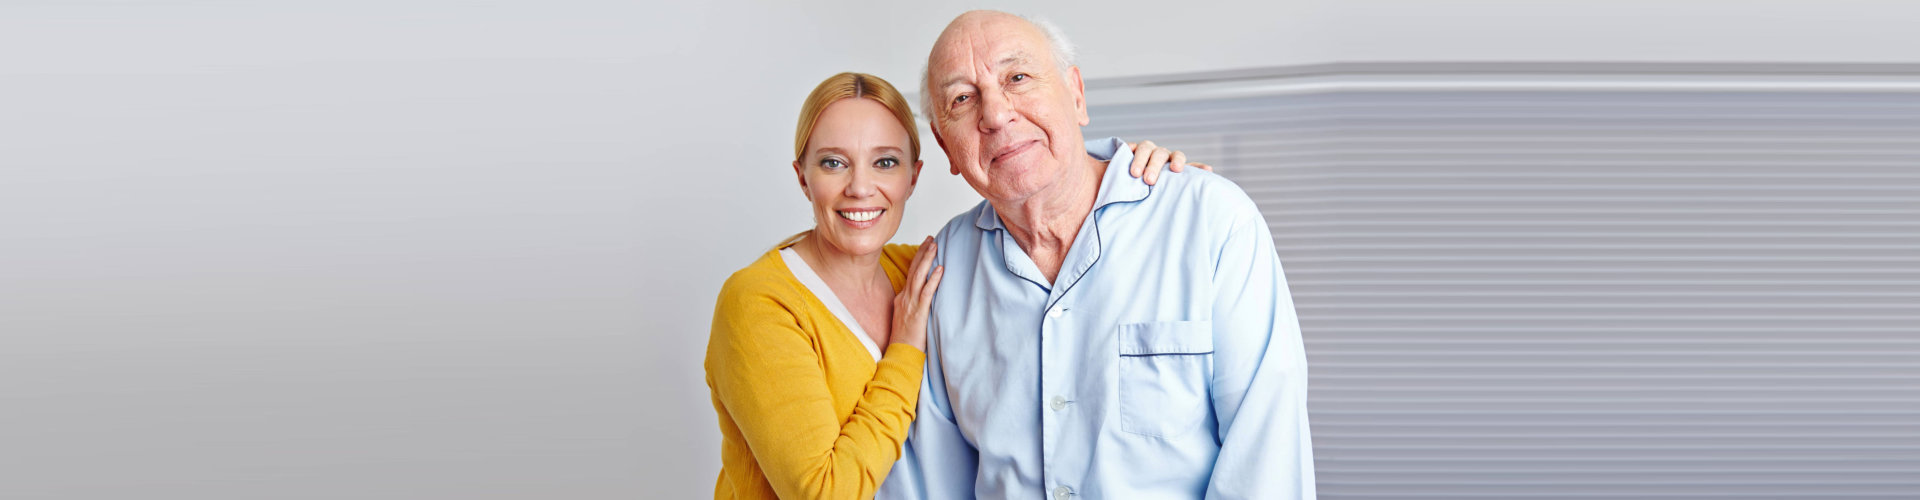 caregiver and elderly person smiling